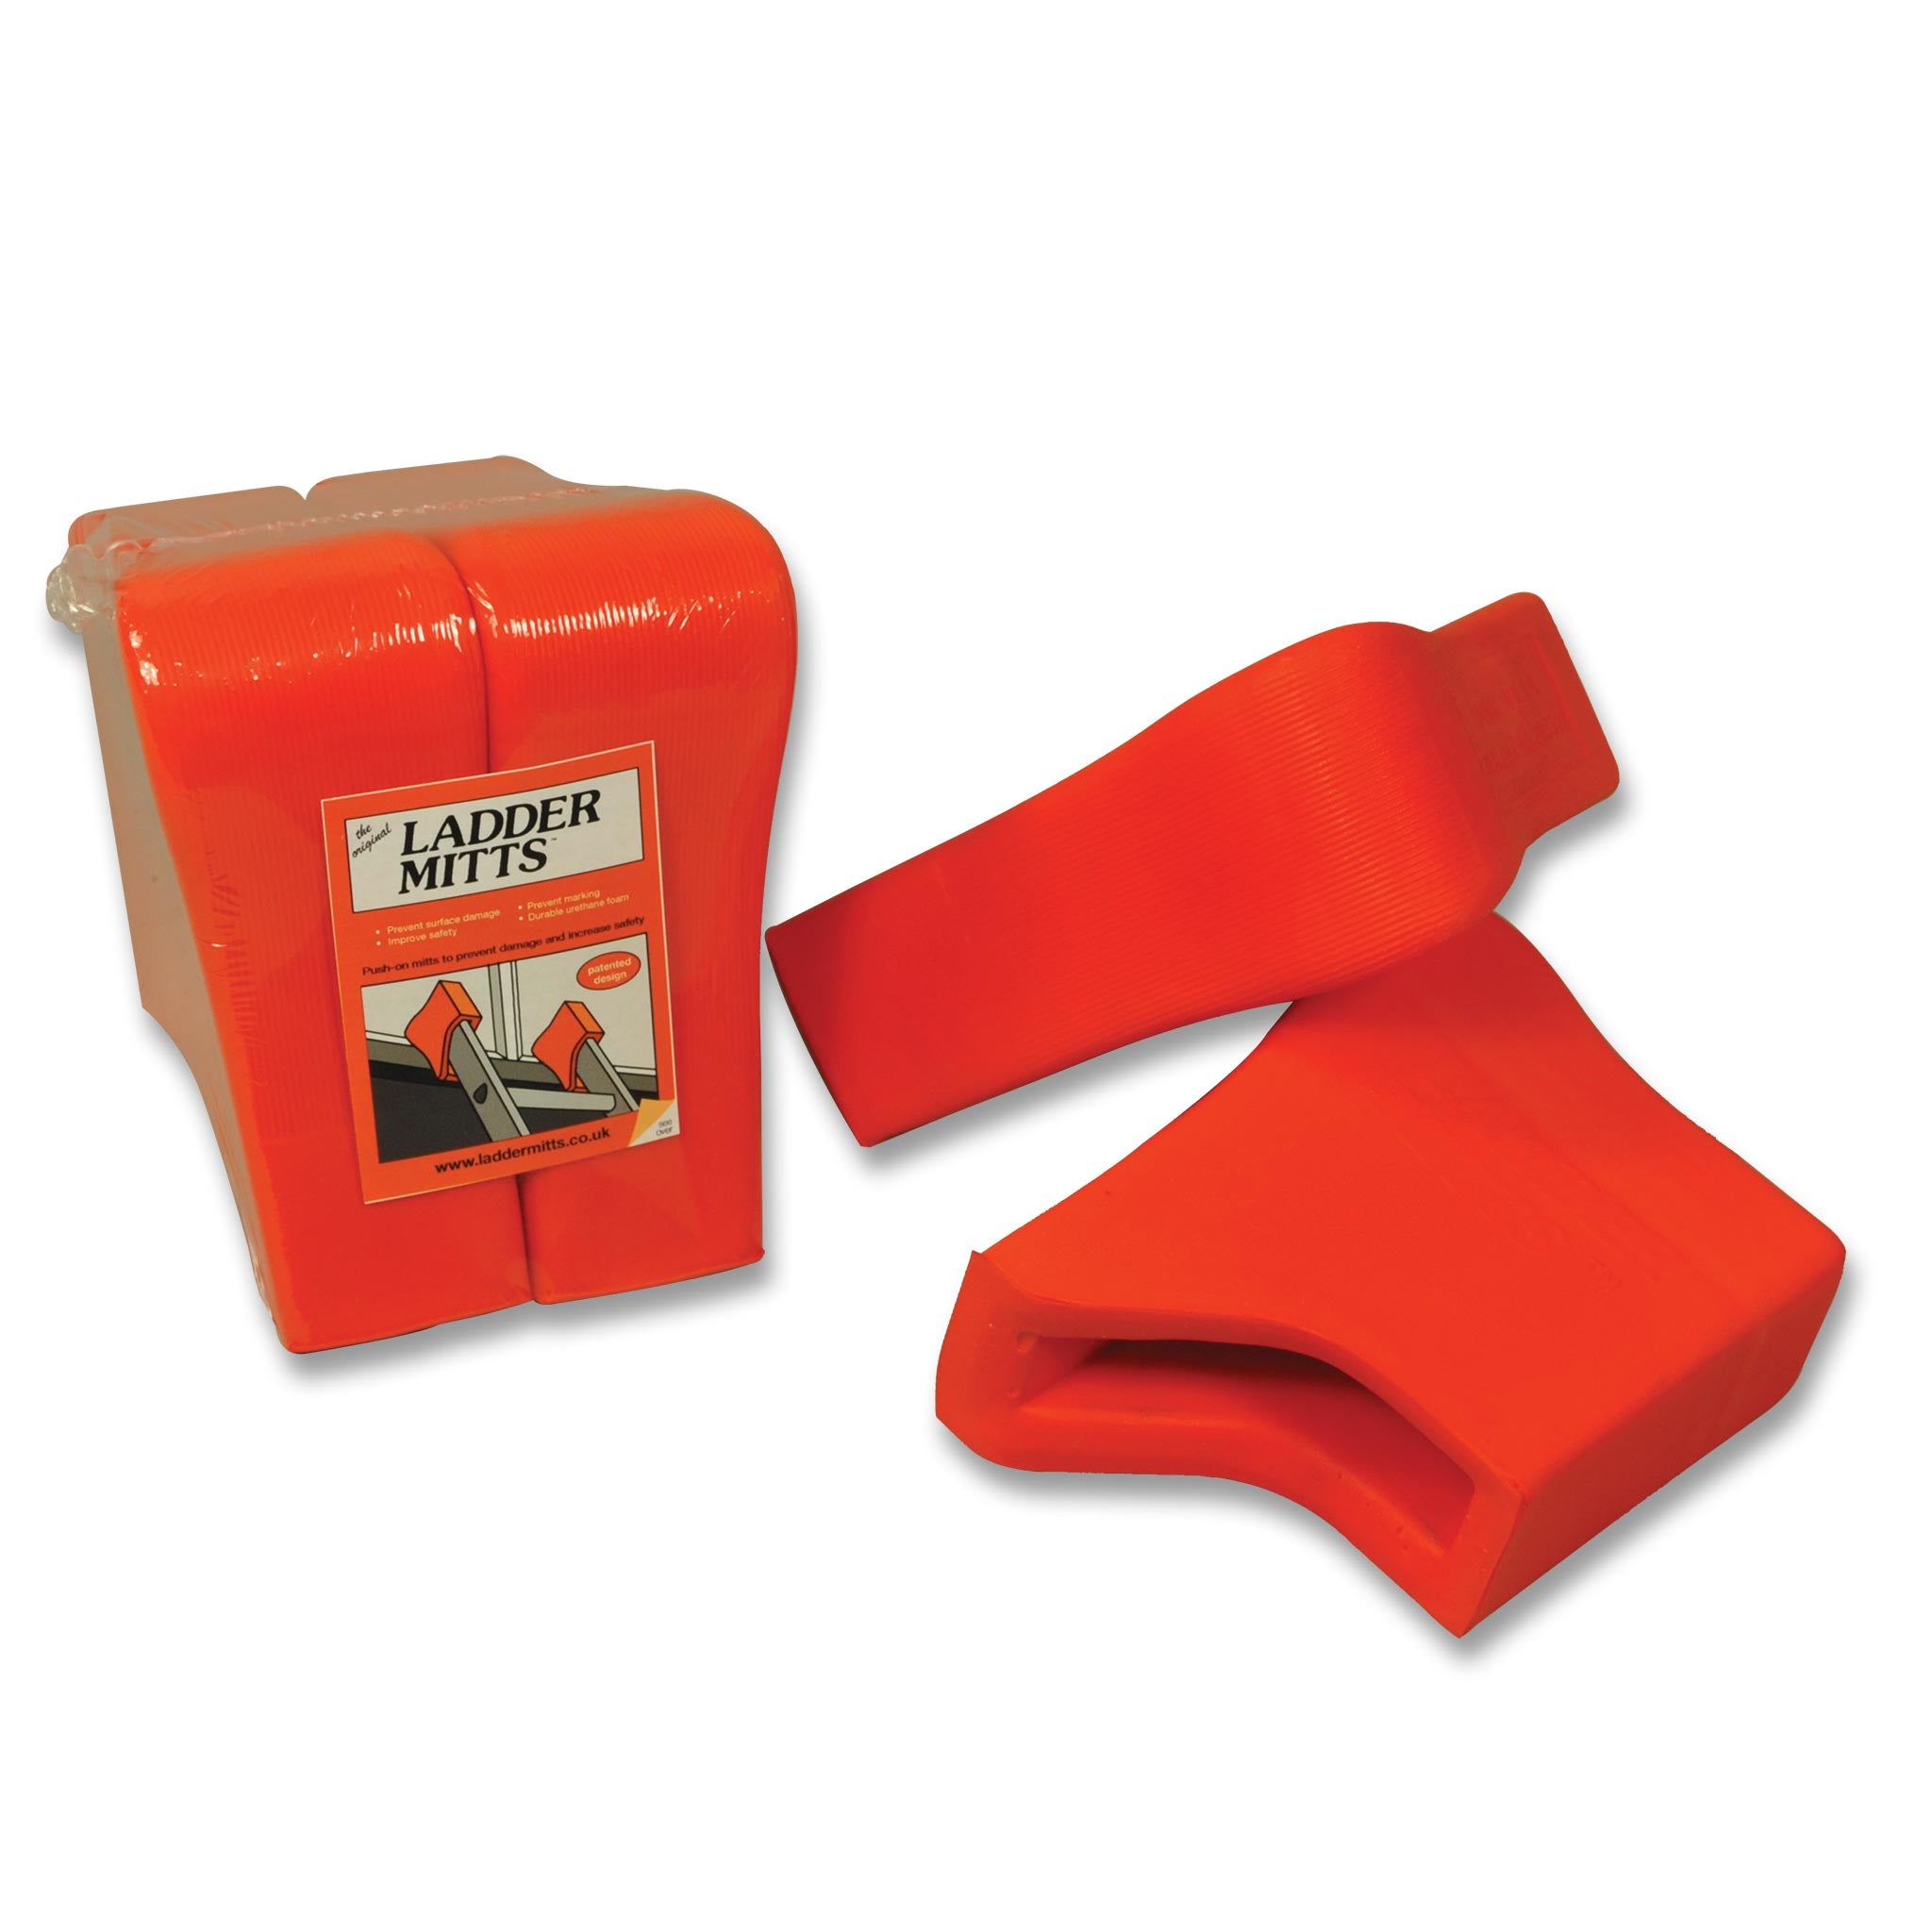 Ladder Mitts - Surface Protectors